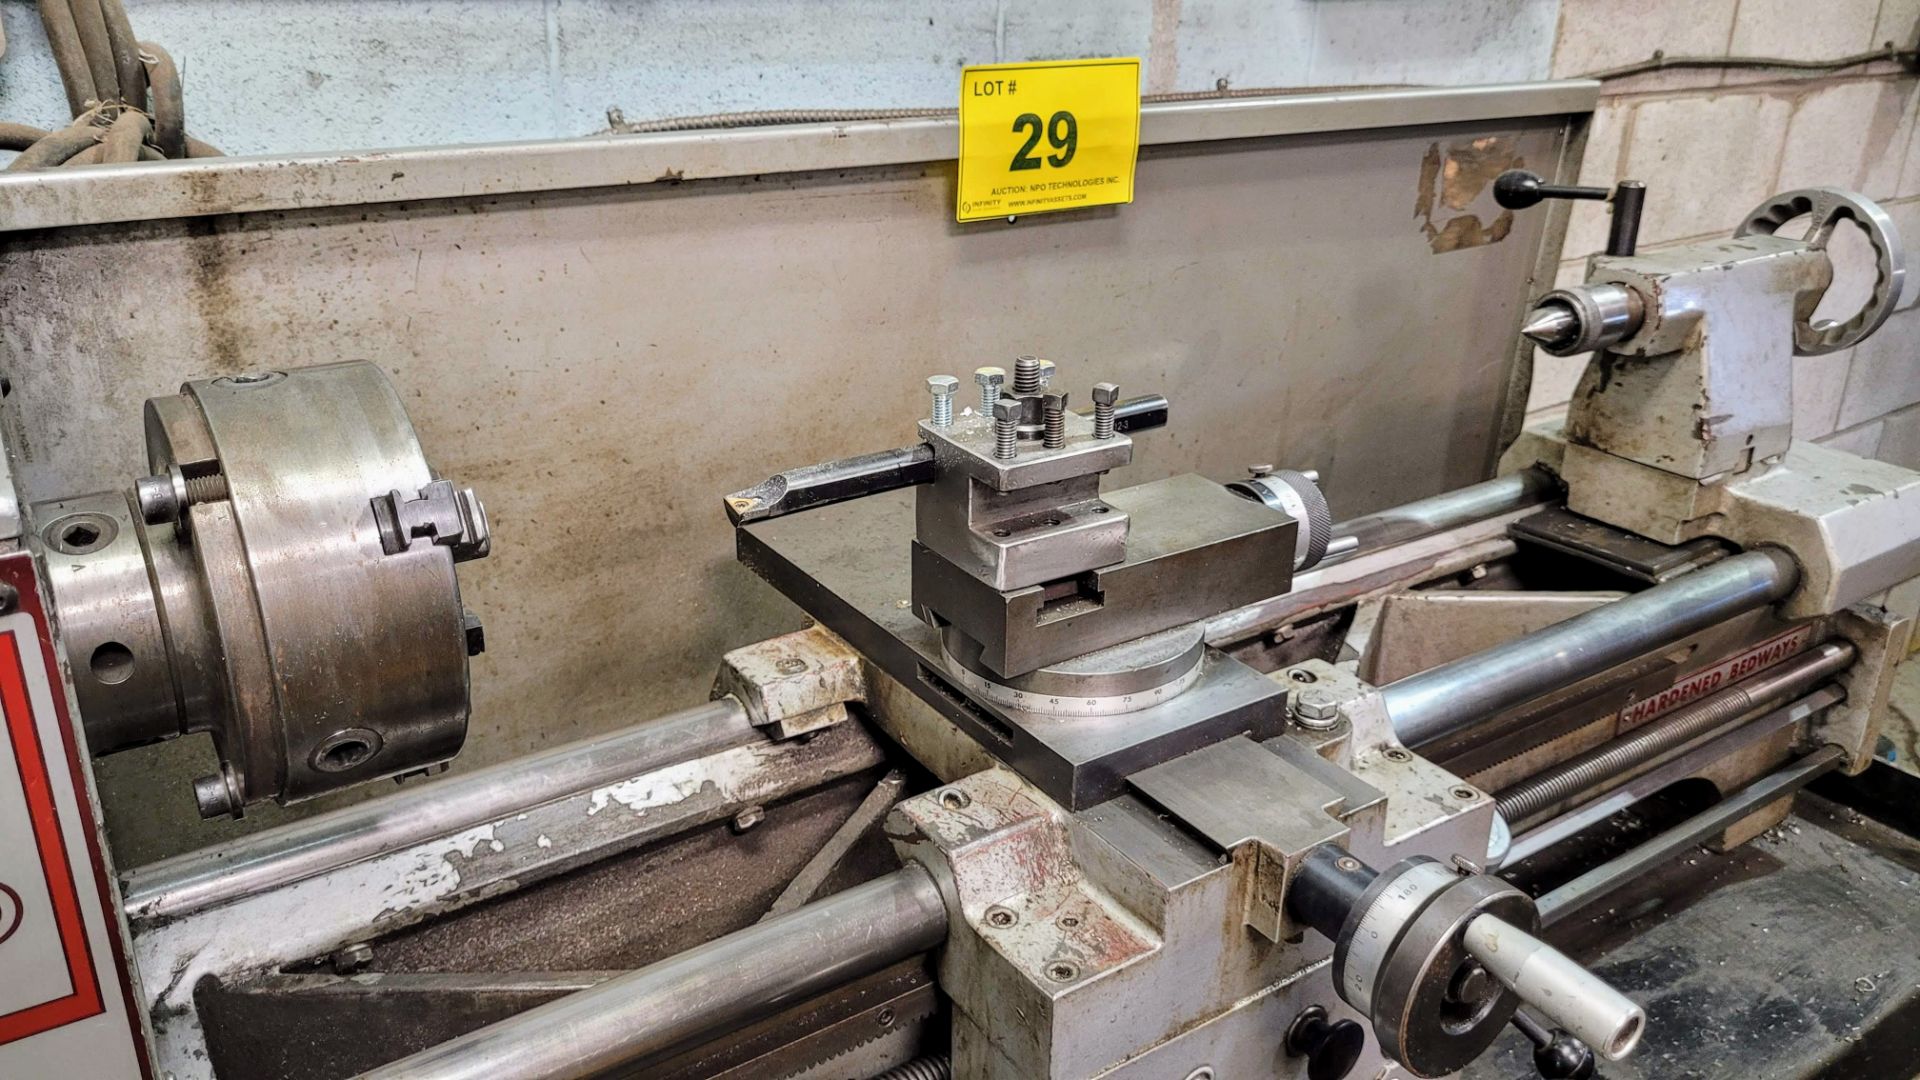 BAXTER APPRENTICE LATHE, 14" X 40", 6" 3-JAW CHUCK, TOOL POST, TAILSTOCK, TOOLING, ETC. - Image 6 of 7